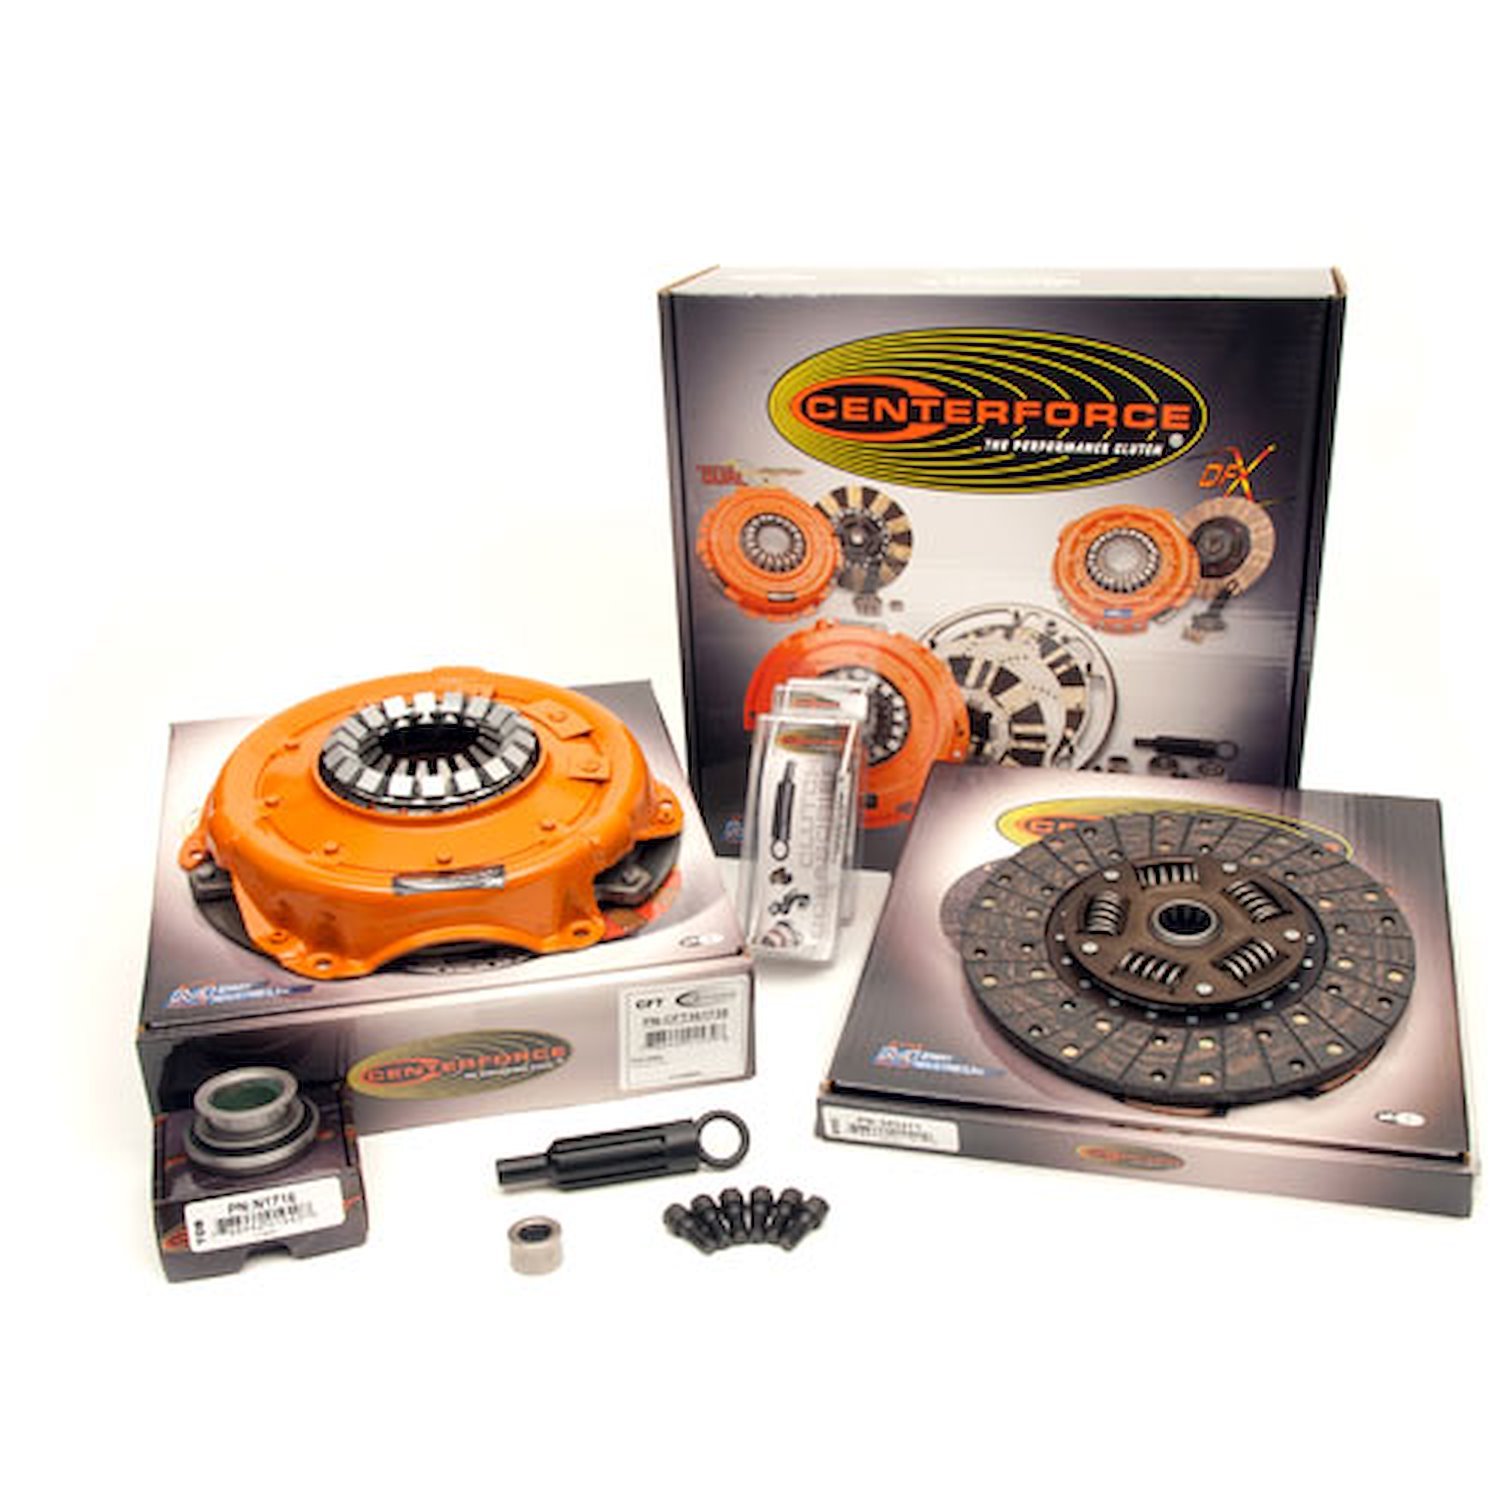 Centerforce II Clutch Kit Includes Pressure Plate, Disc, Alignment Tool, Throw Out Bearing, Pilot Bearing, Pressure Plate Bo